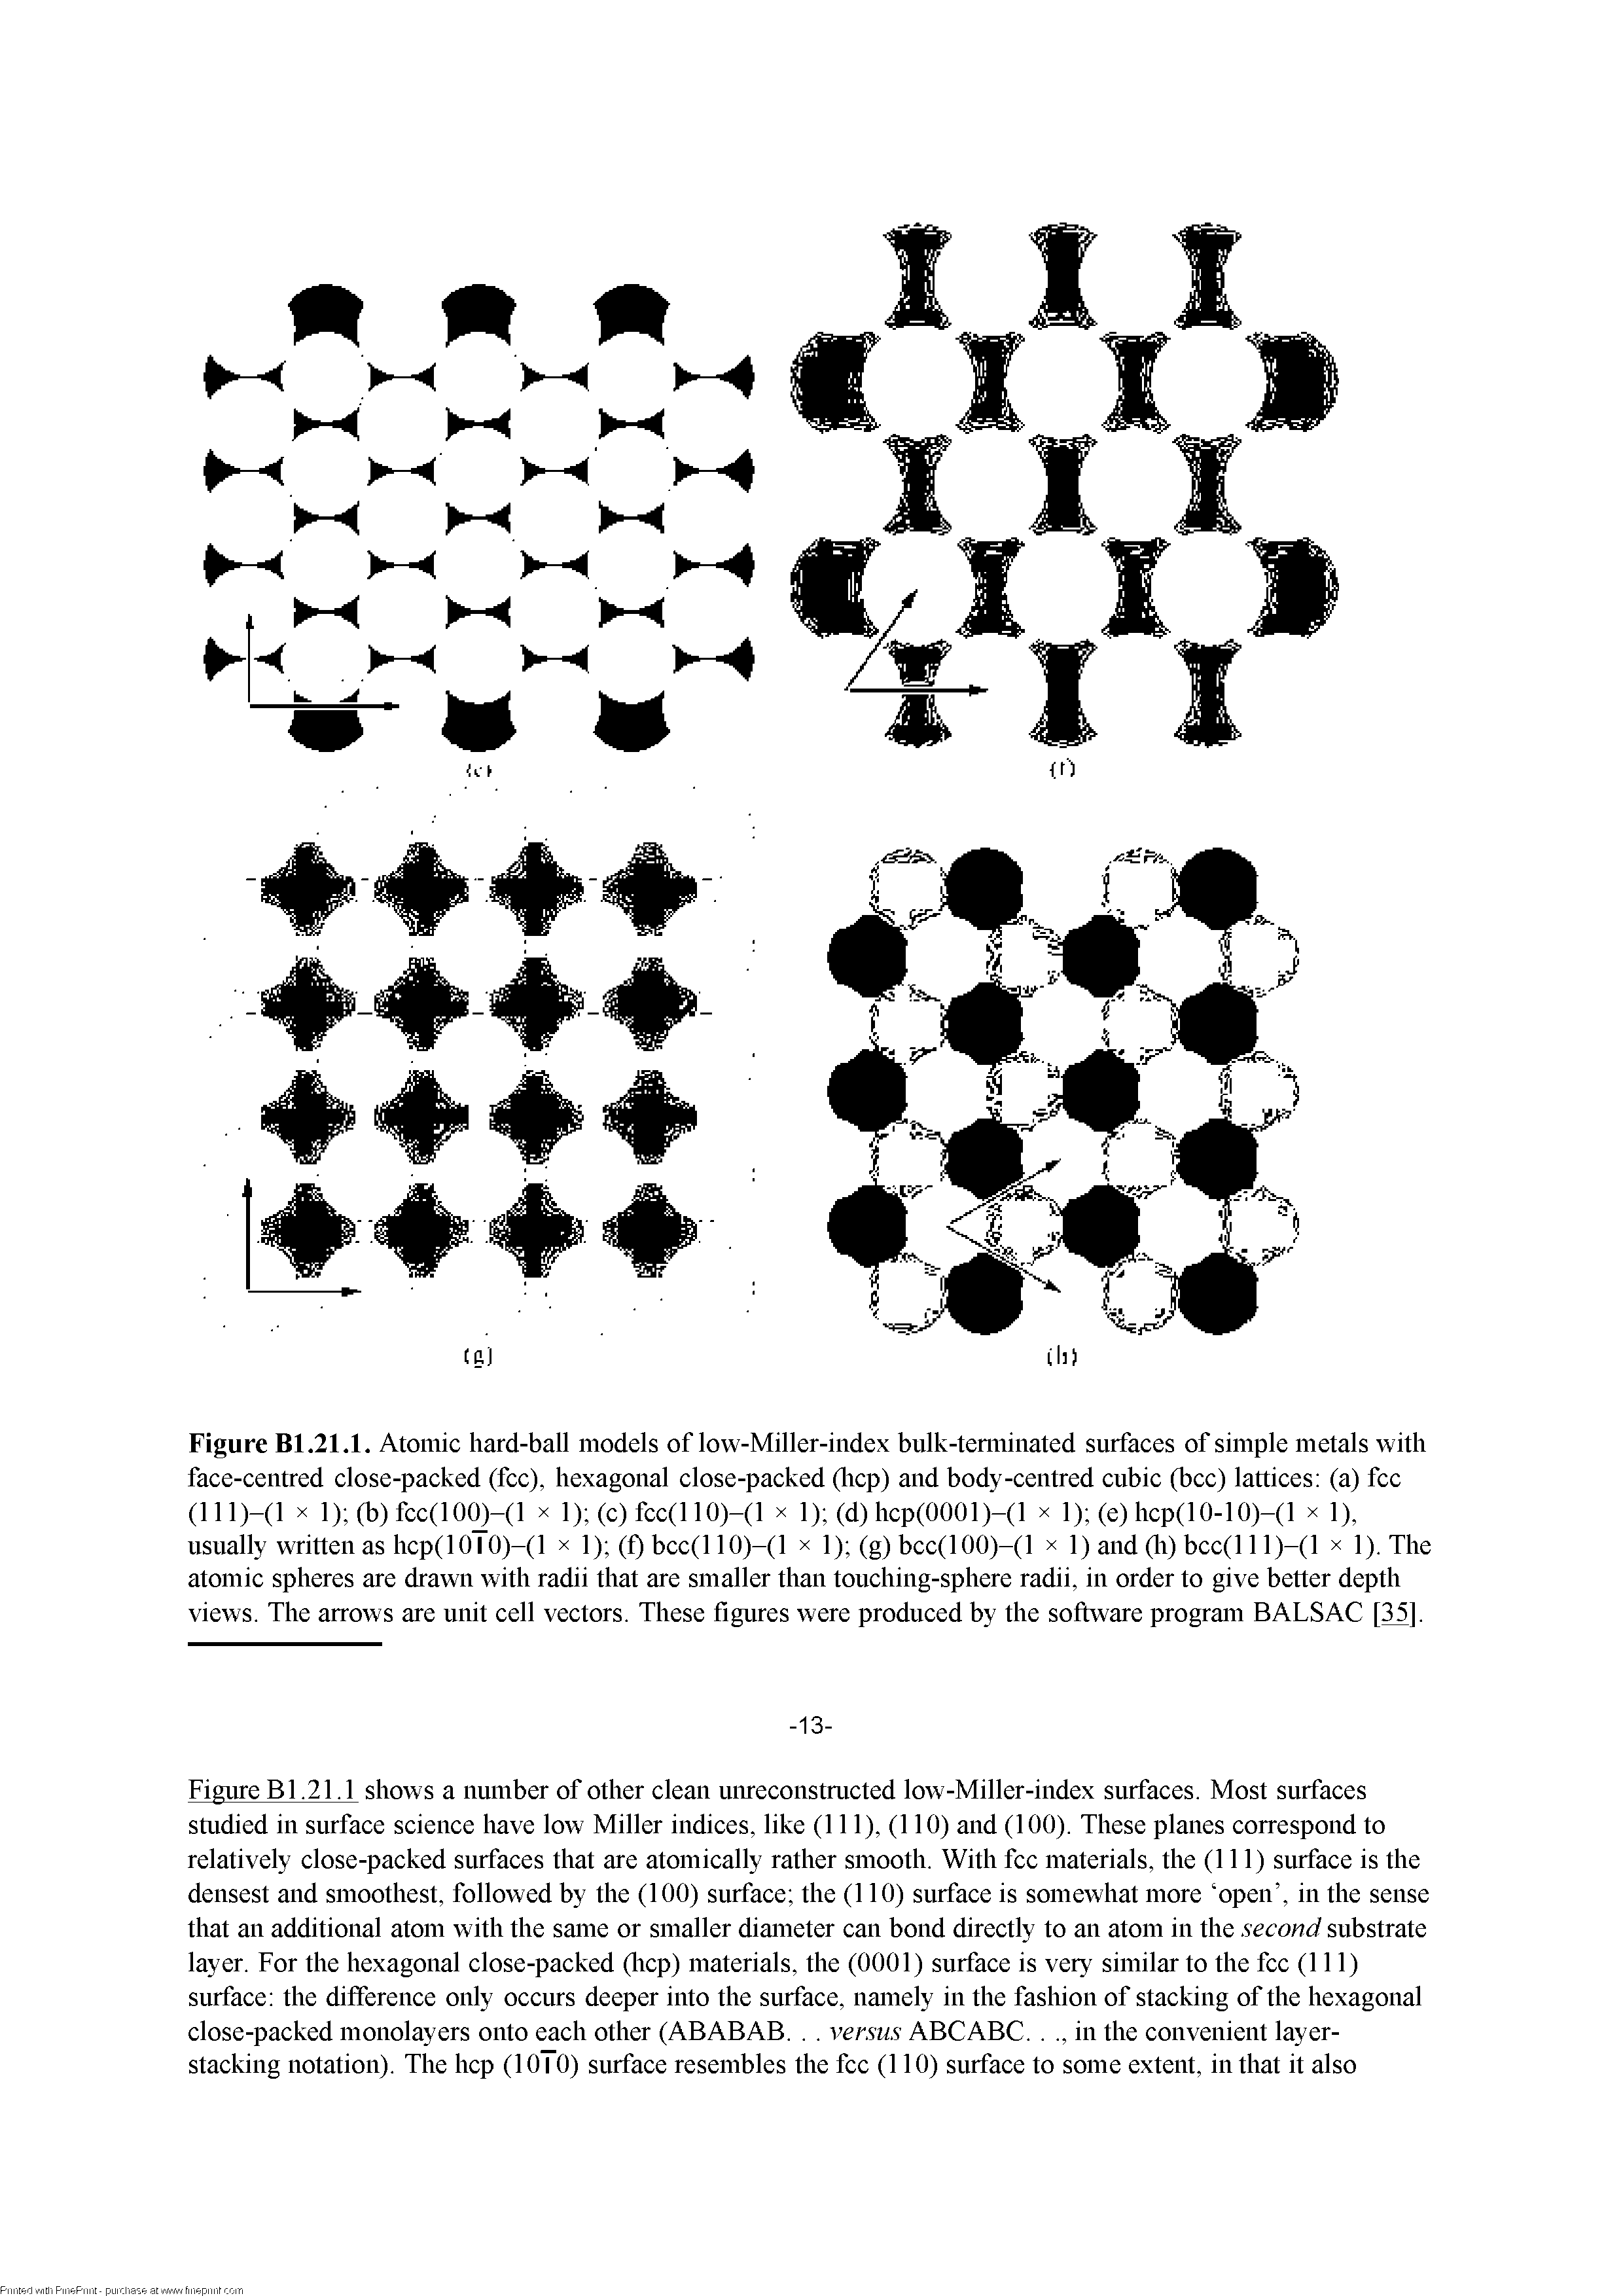 Figure Bl.21.1 shows a number of other clean umeconstnicted low-Miller-index surfaces. Most surfaces studied in surface science have low Miller indices, like (111), (110) and (100). These planes correspond to relatively close-packed surfaces that are atomically rather smooth. With fee materials, the (111) surface is the densest and smoothest, followed by the (100) surface the (110) surface is somewhat more open , in the sense that an additional atom with the same or smaller diameter can bond directly to an atom in the second substrate layer. For the hexagonal close-packed (licp) materials, the (0001) surface is very similar to the fee (111) surface the difference only occurs deeper into the surface, namely in the fashion of stacking of the hexagonal close-packed monolayers onto each other (ABABAB.. . versus ABCABC.. ., in the convenient layerstacking notation). The hep (1010) surface resembles the fee (110) surface to some extent, in that it also...